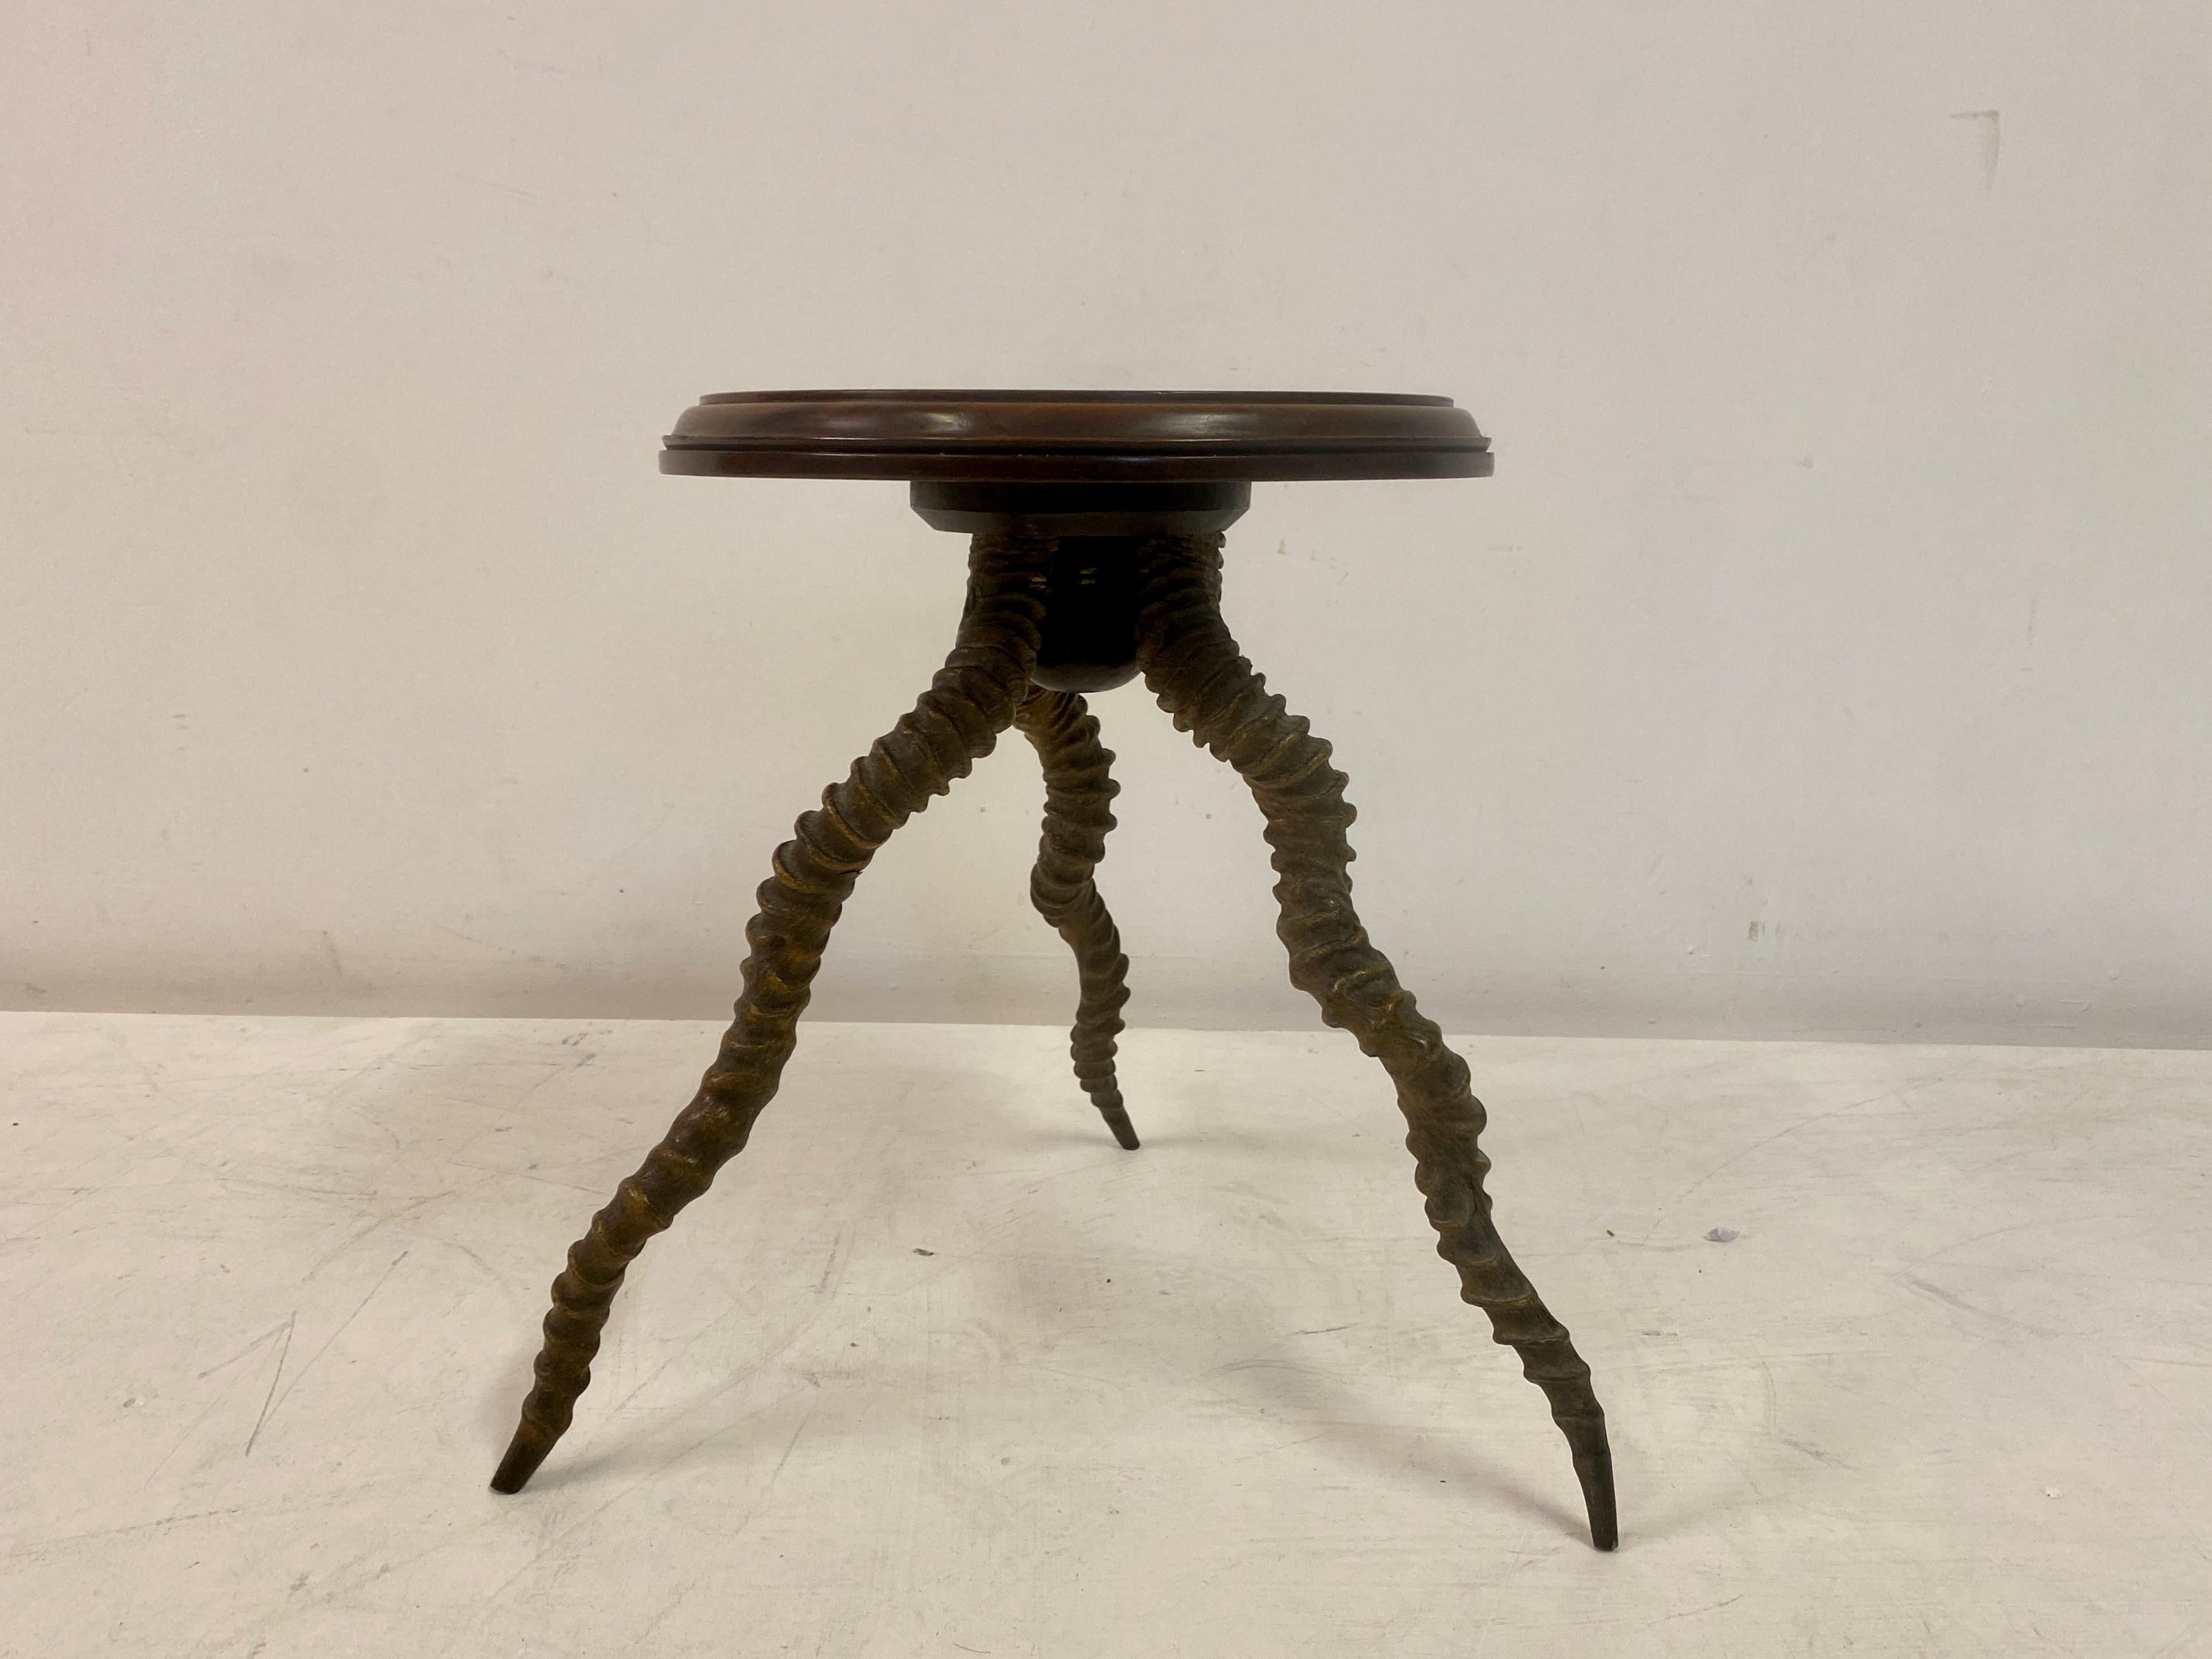 Side table

Indian rosewood top

Three legs made from impala horns

England, late 19th/early 20th Century.